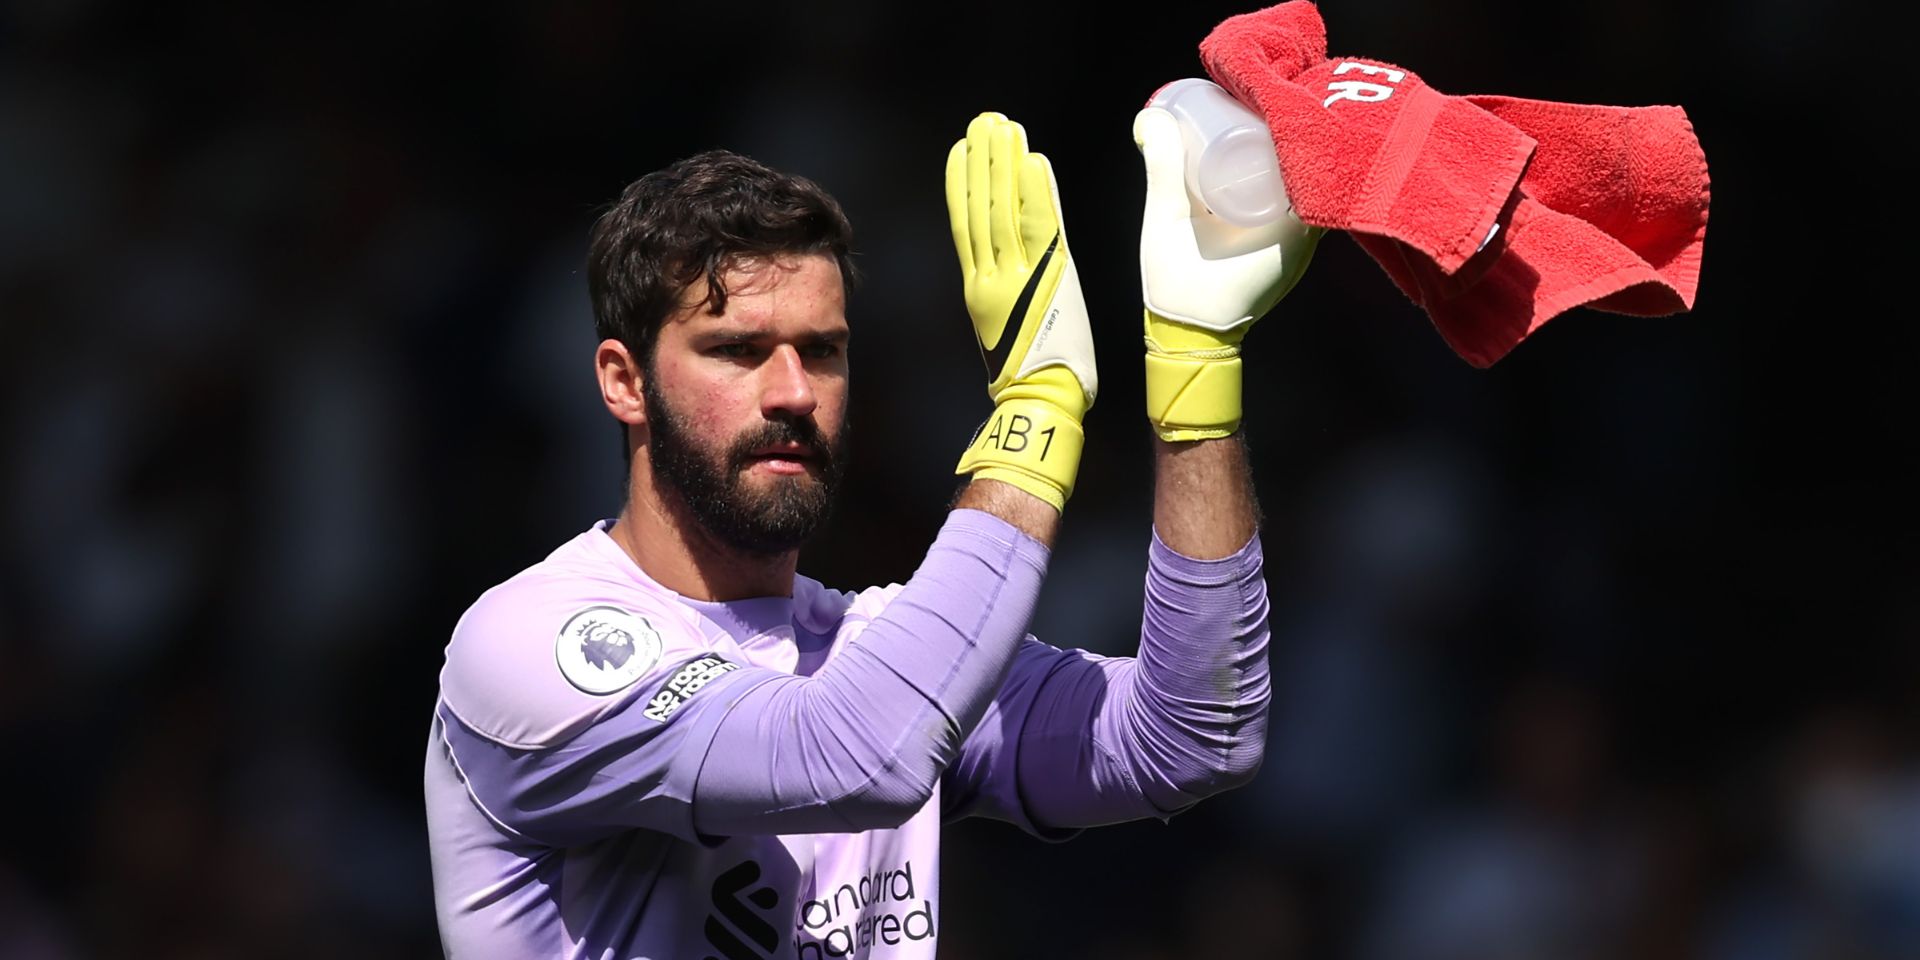 Alisson Becker shortlisted for the Yashin Trophy in appreciation of his 2022 goalkeeping performances